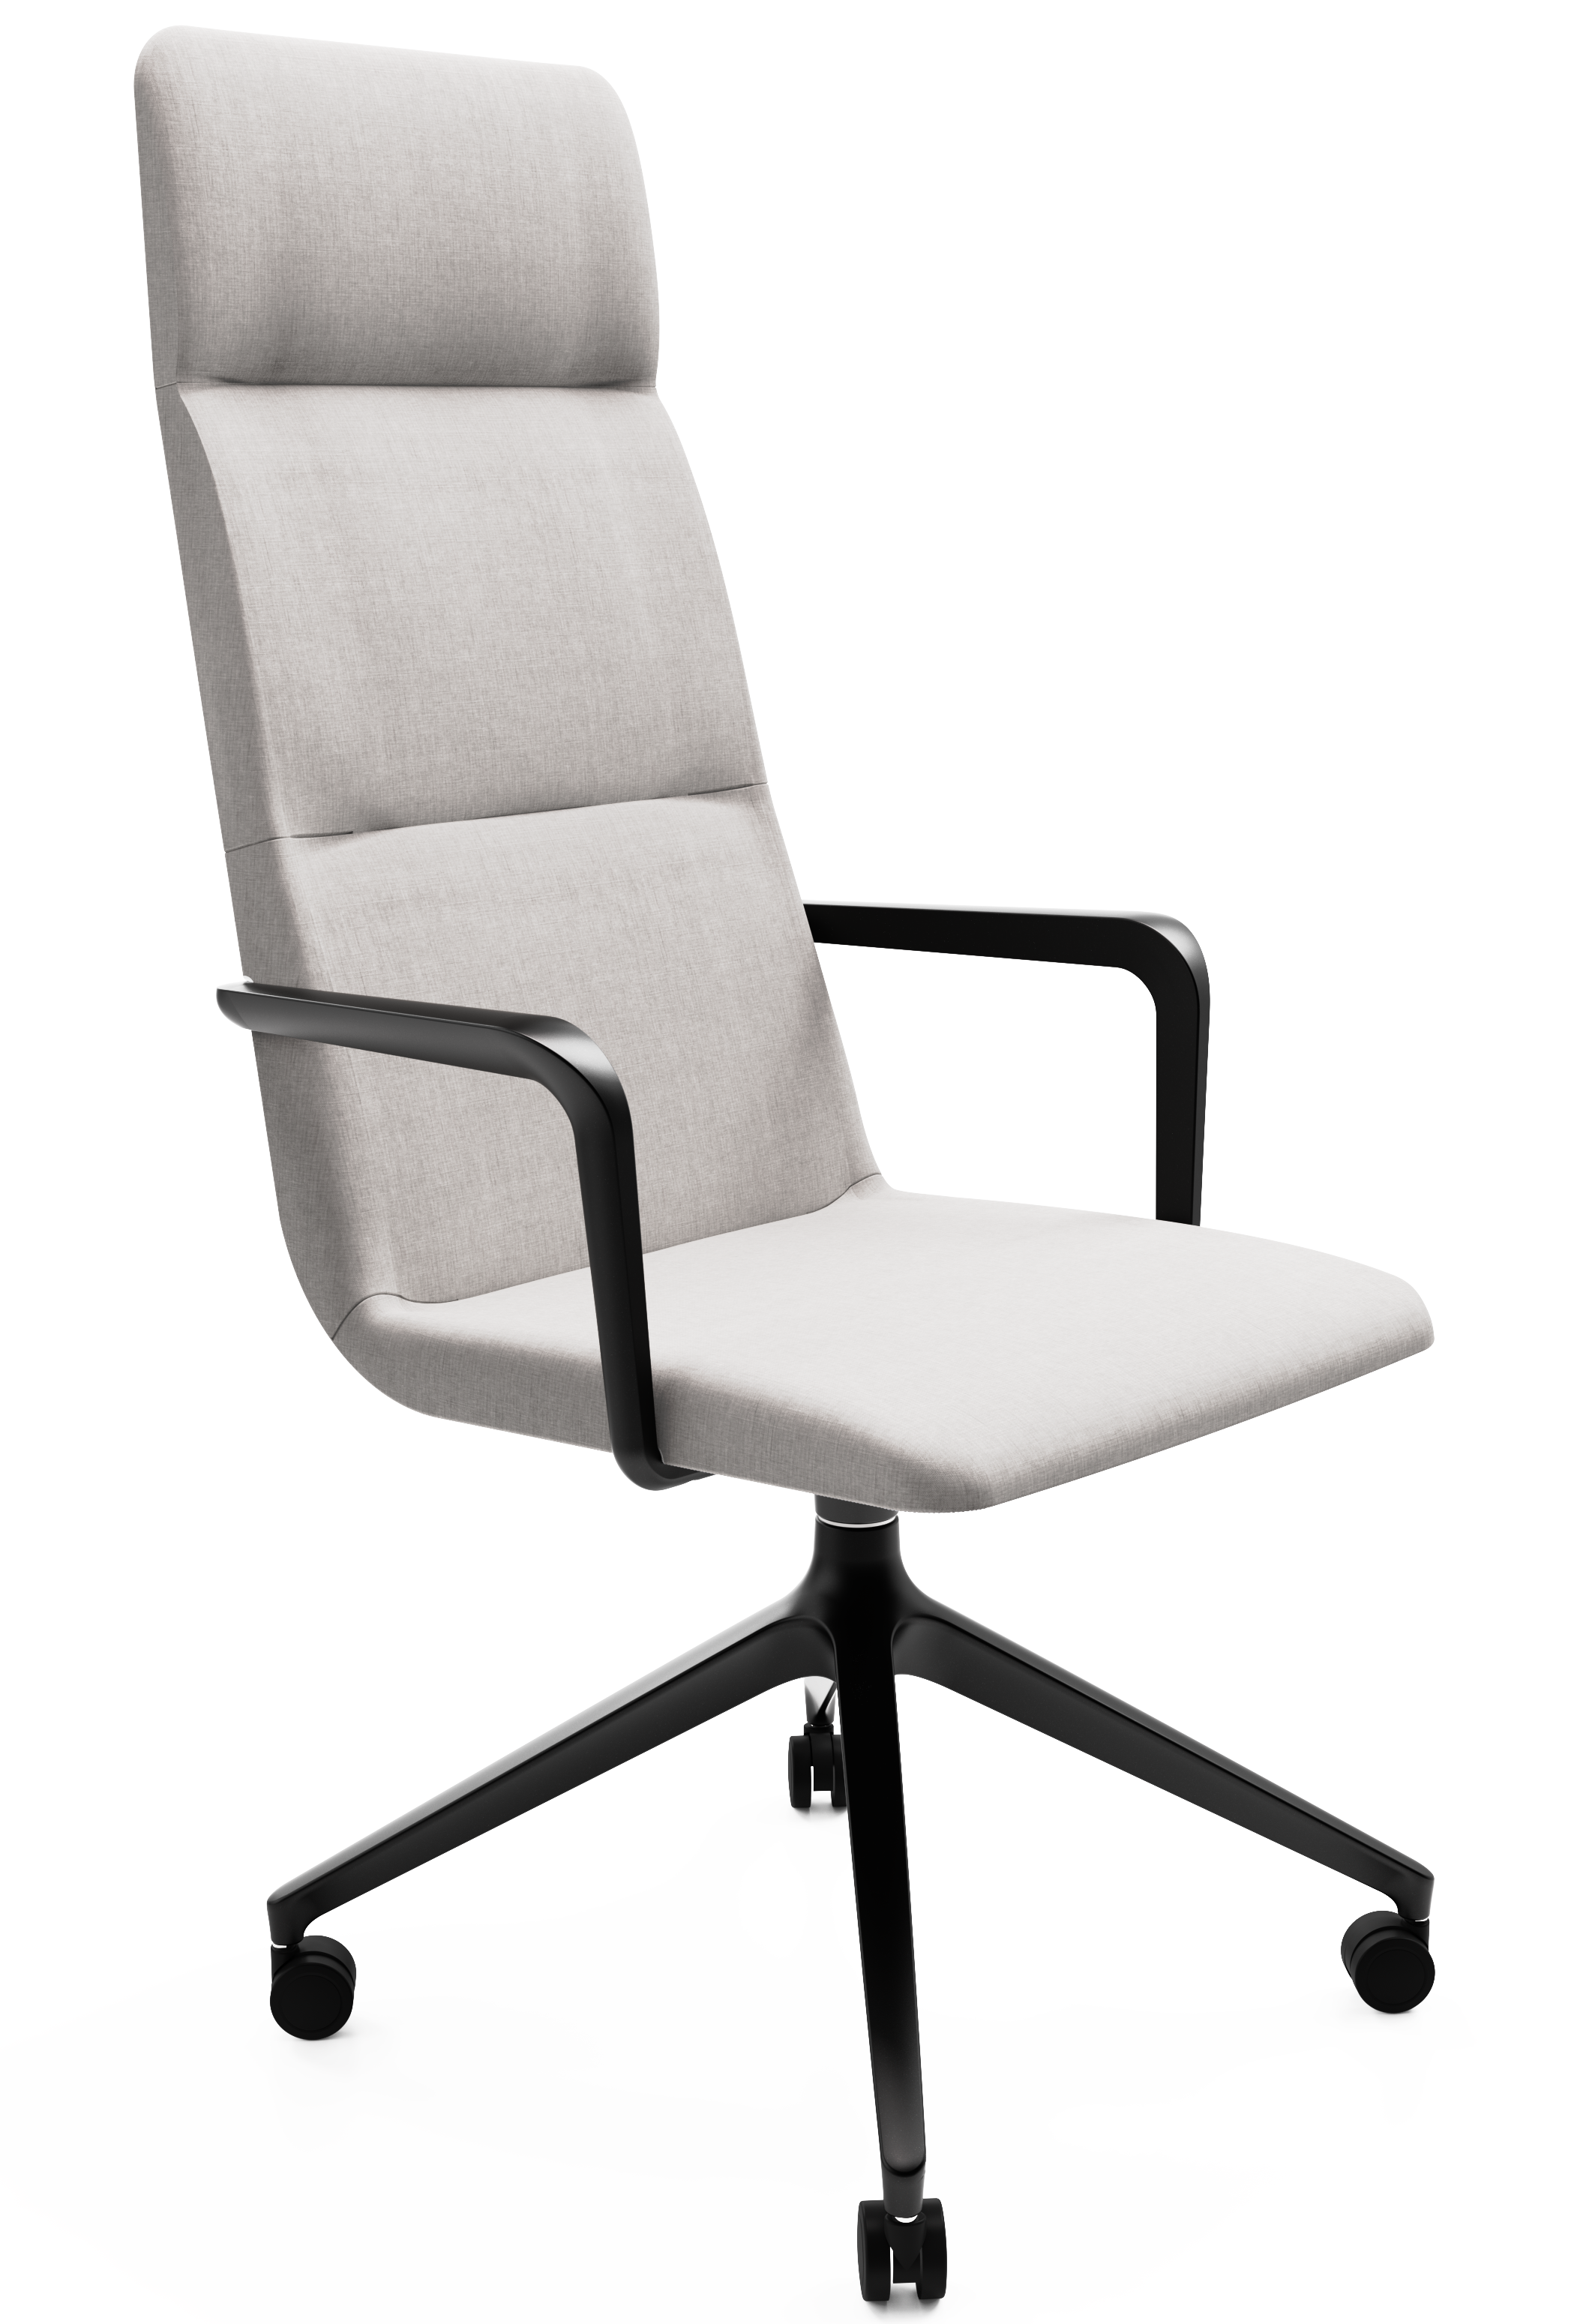 WS - Accord High 4 star base with castors chair - black - remix 126 - front angle